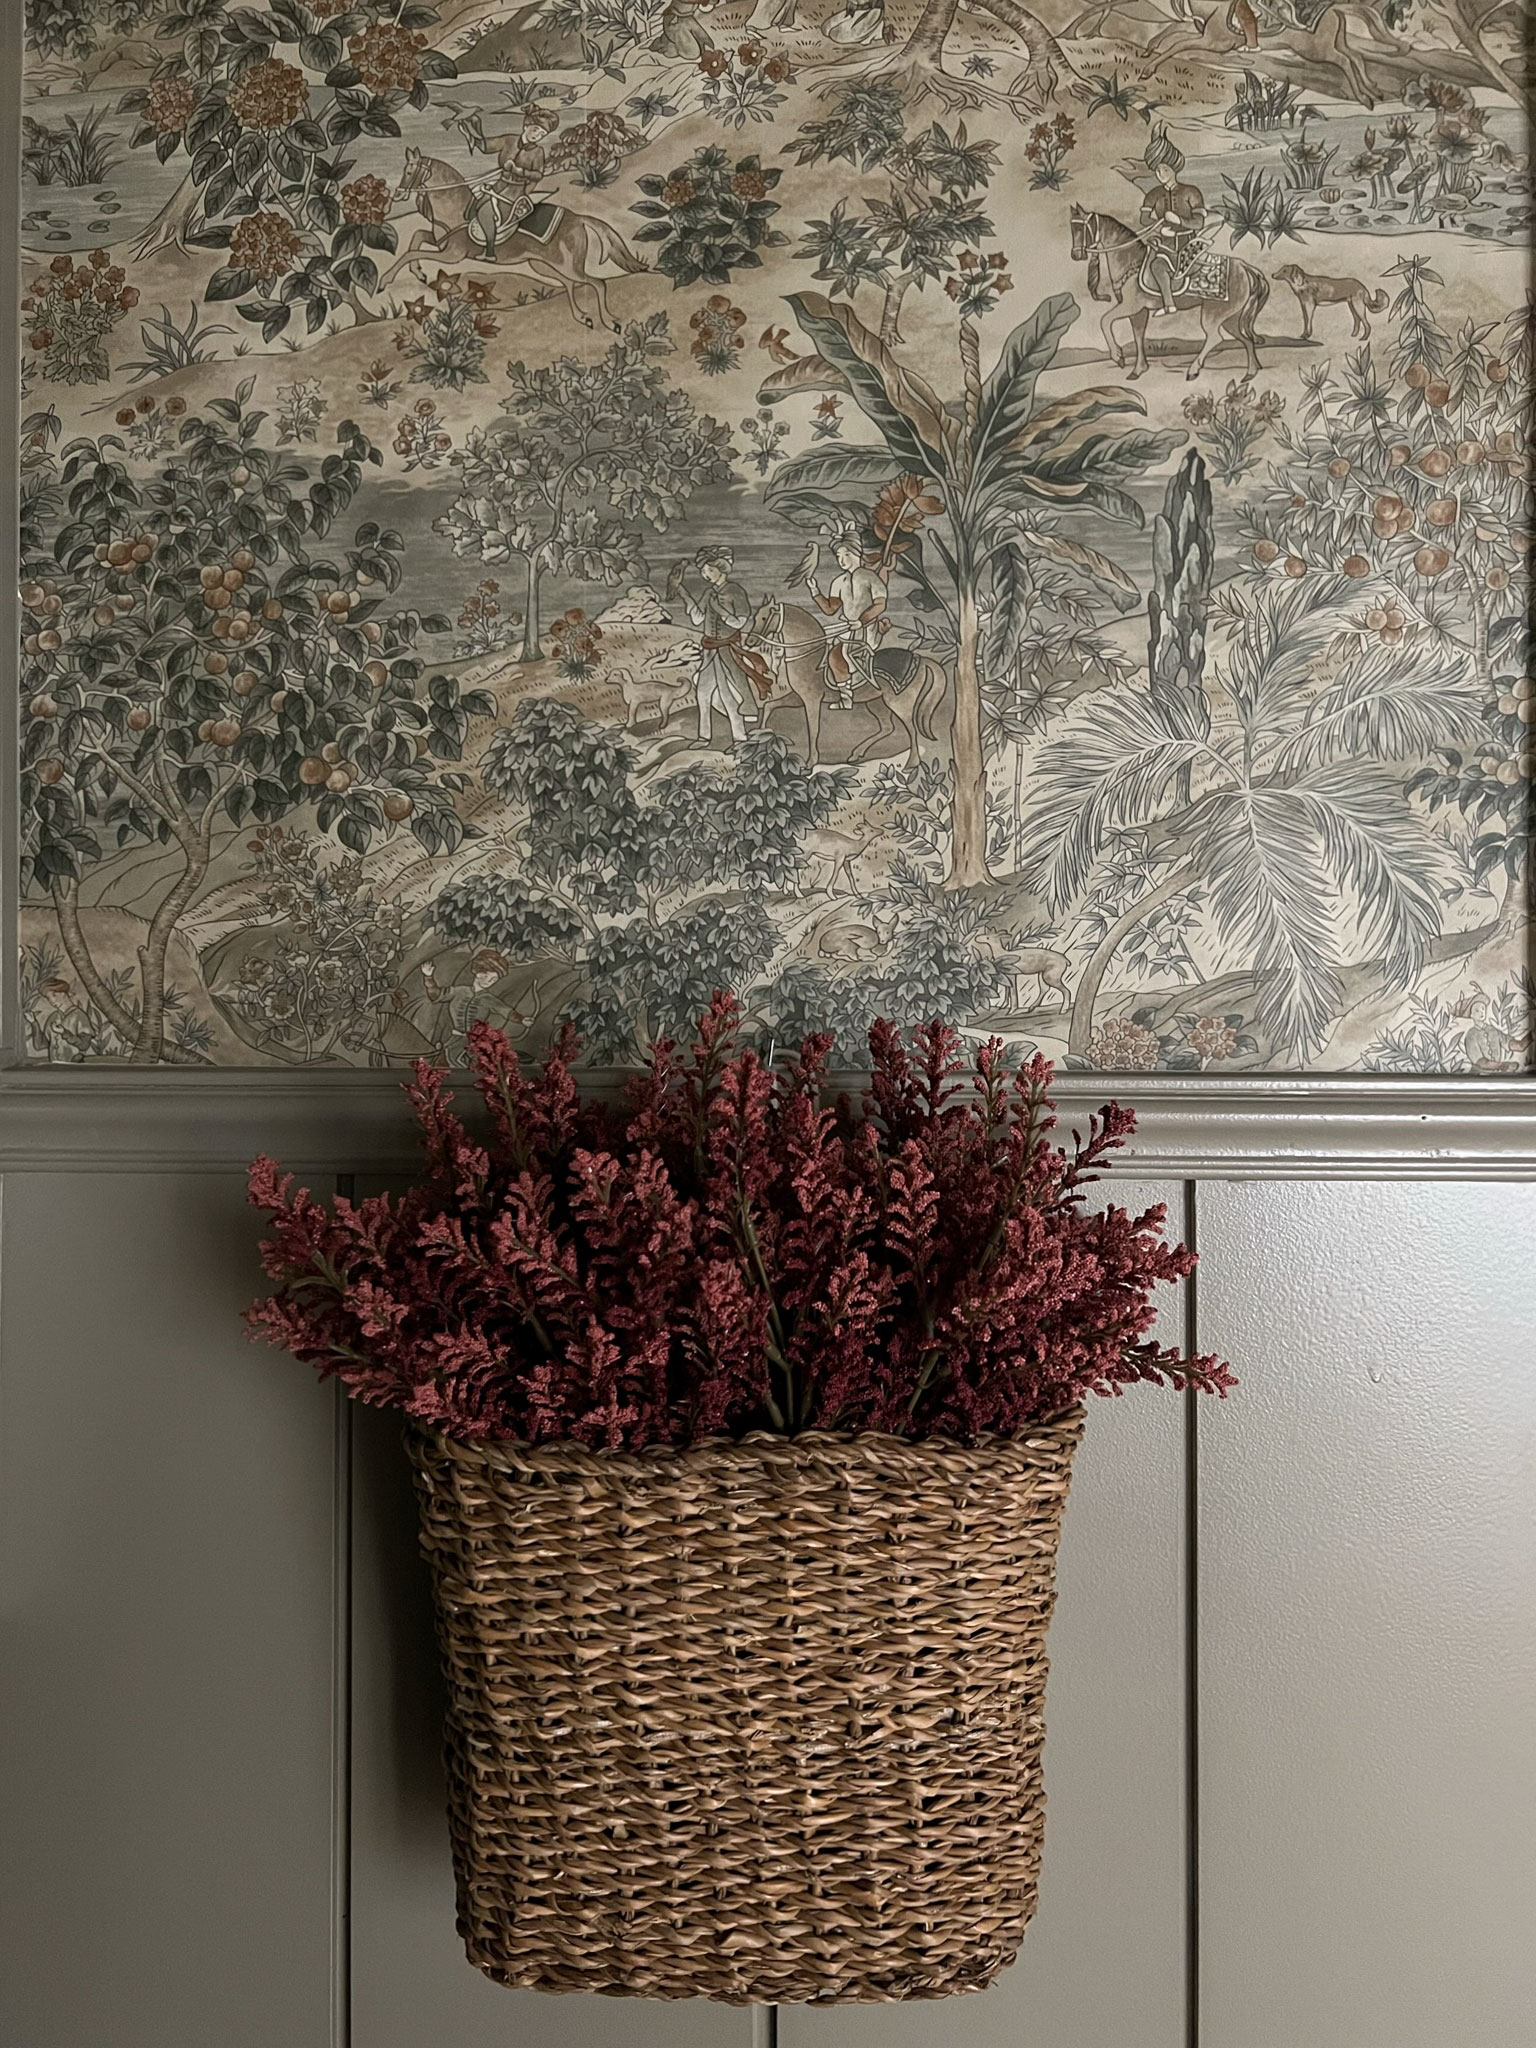 close up of scenic wallpaper with basket hanging from wall with flowers in it